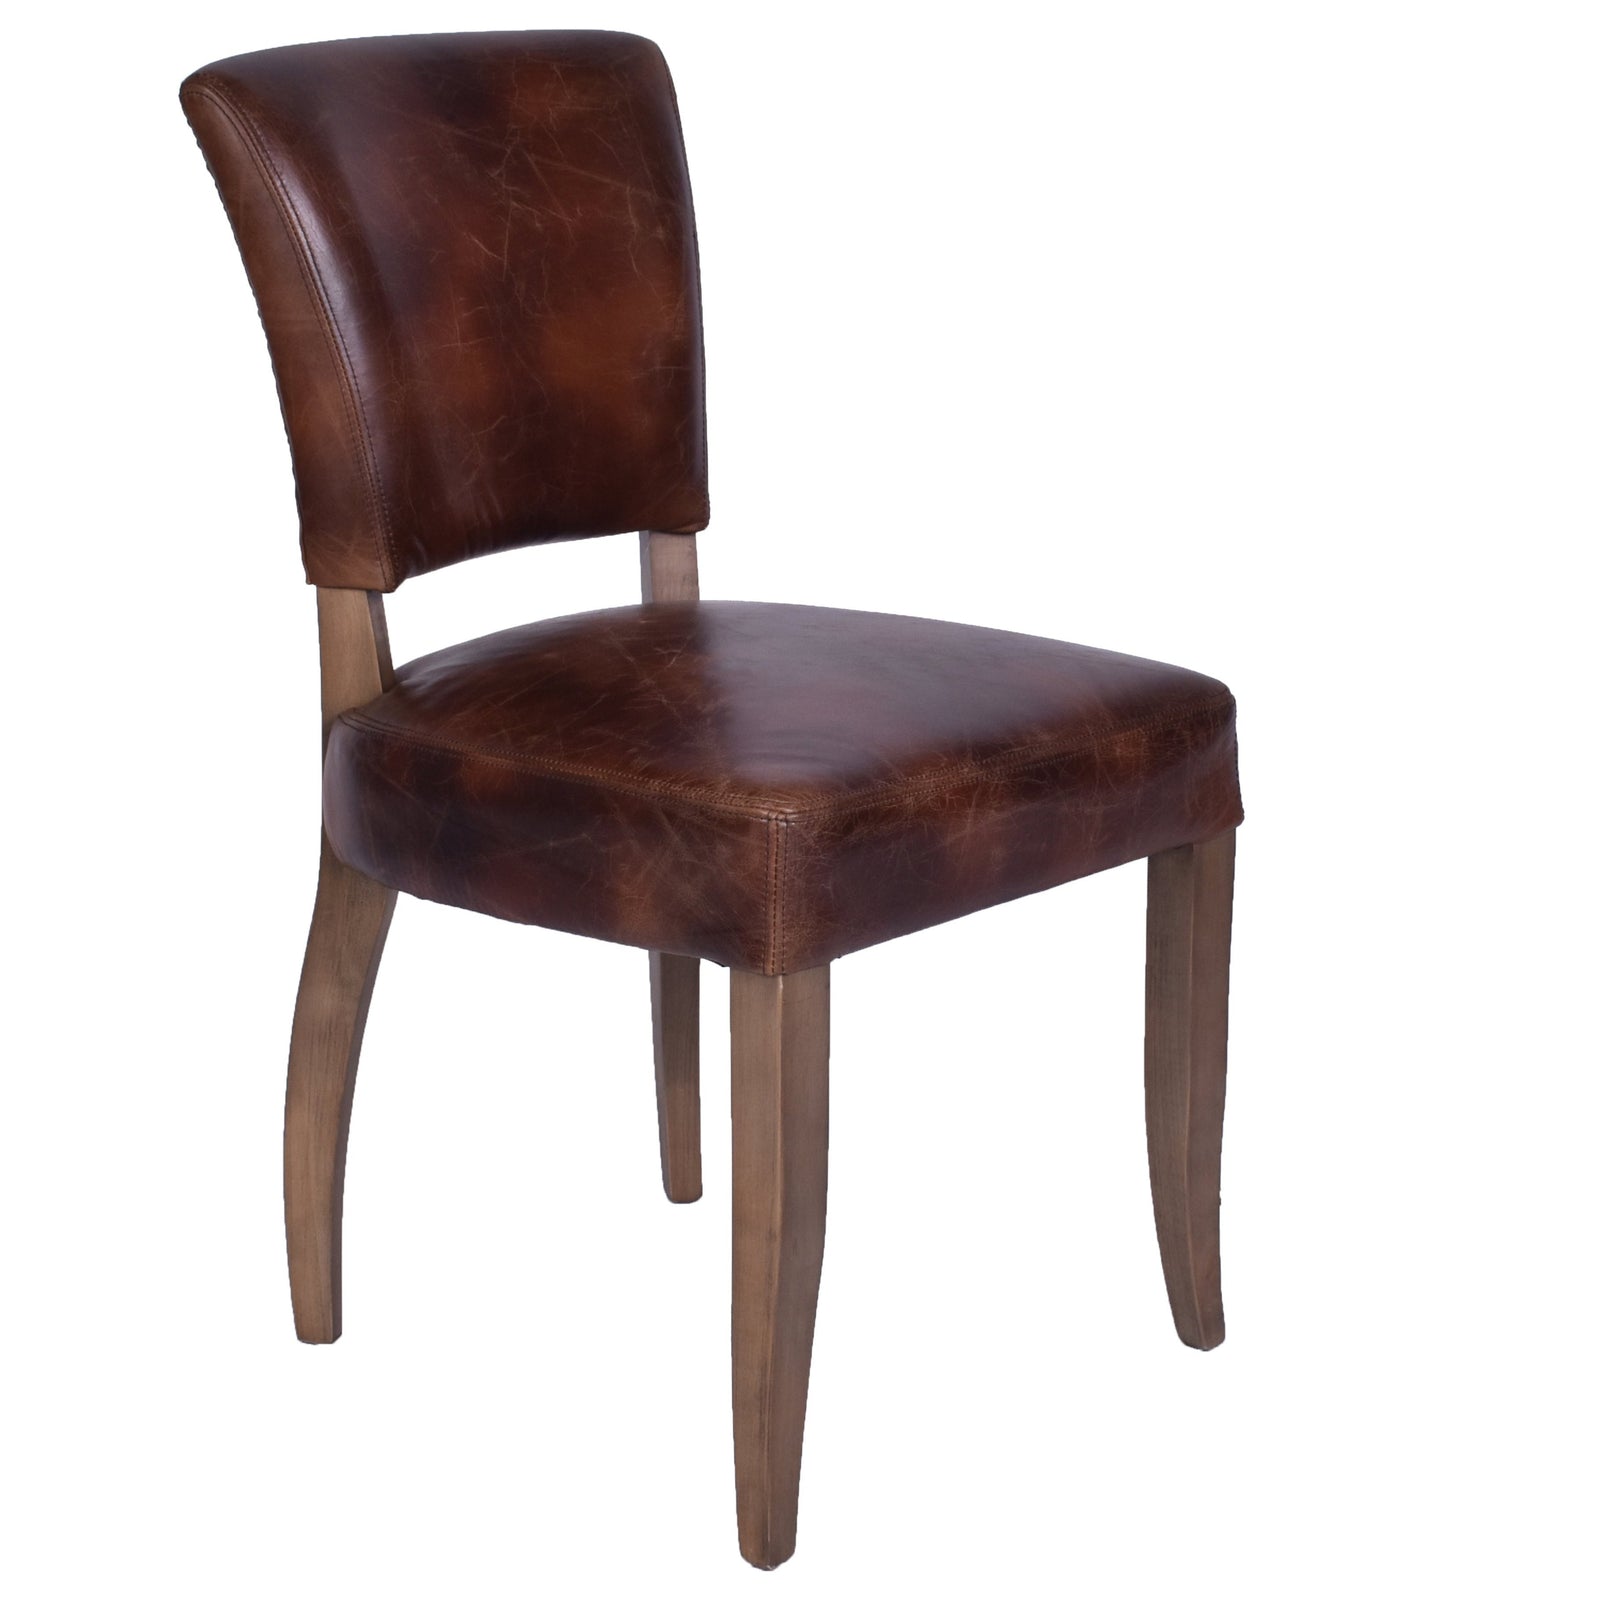 Cartier Waxed Distressed Leather Dining Chair | Luxury Dining Chairs